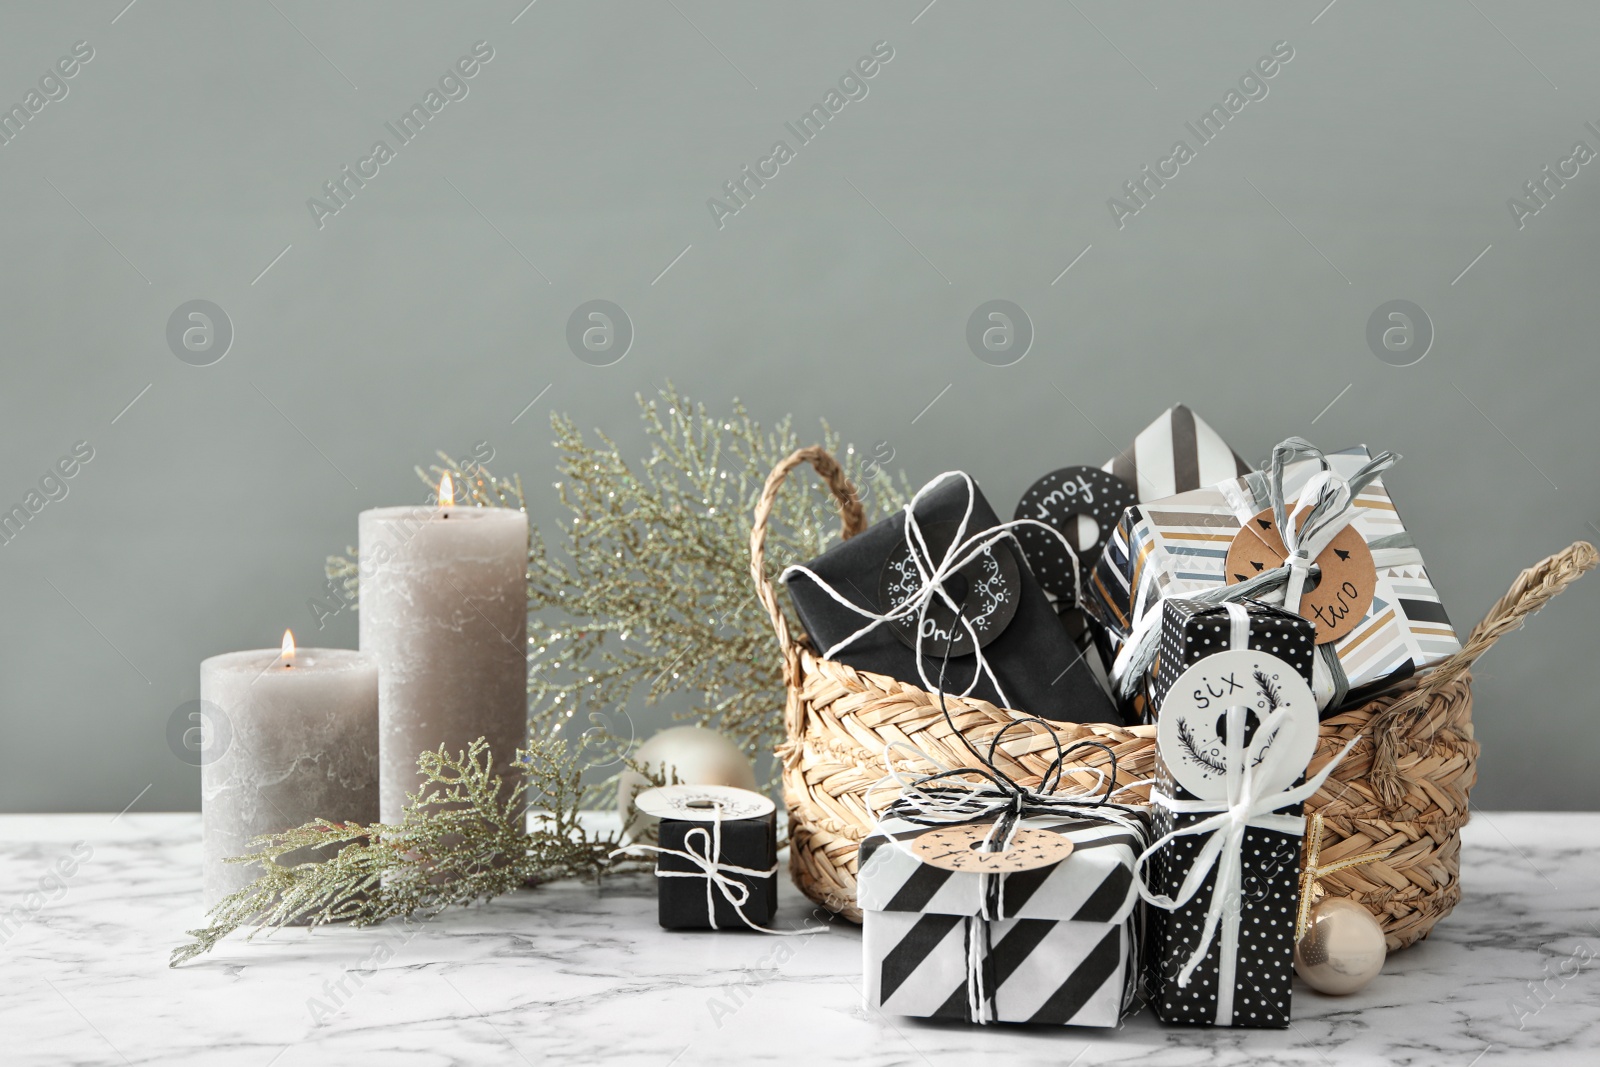 Photo of Gifts for Christmas advent calendar, burning candles and festive decor on white marble table against grey background